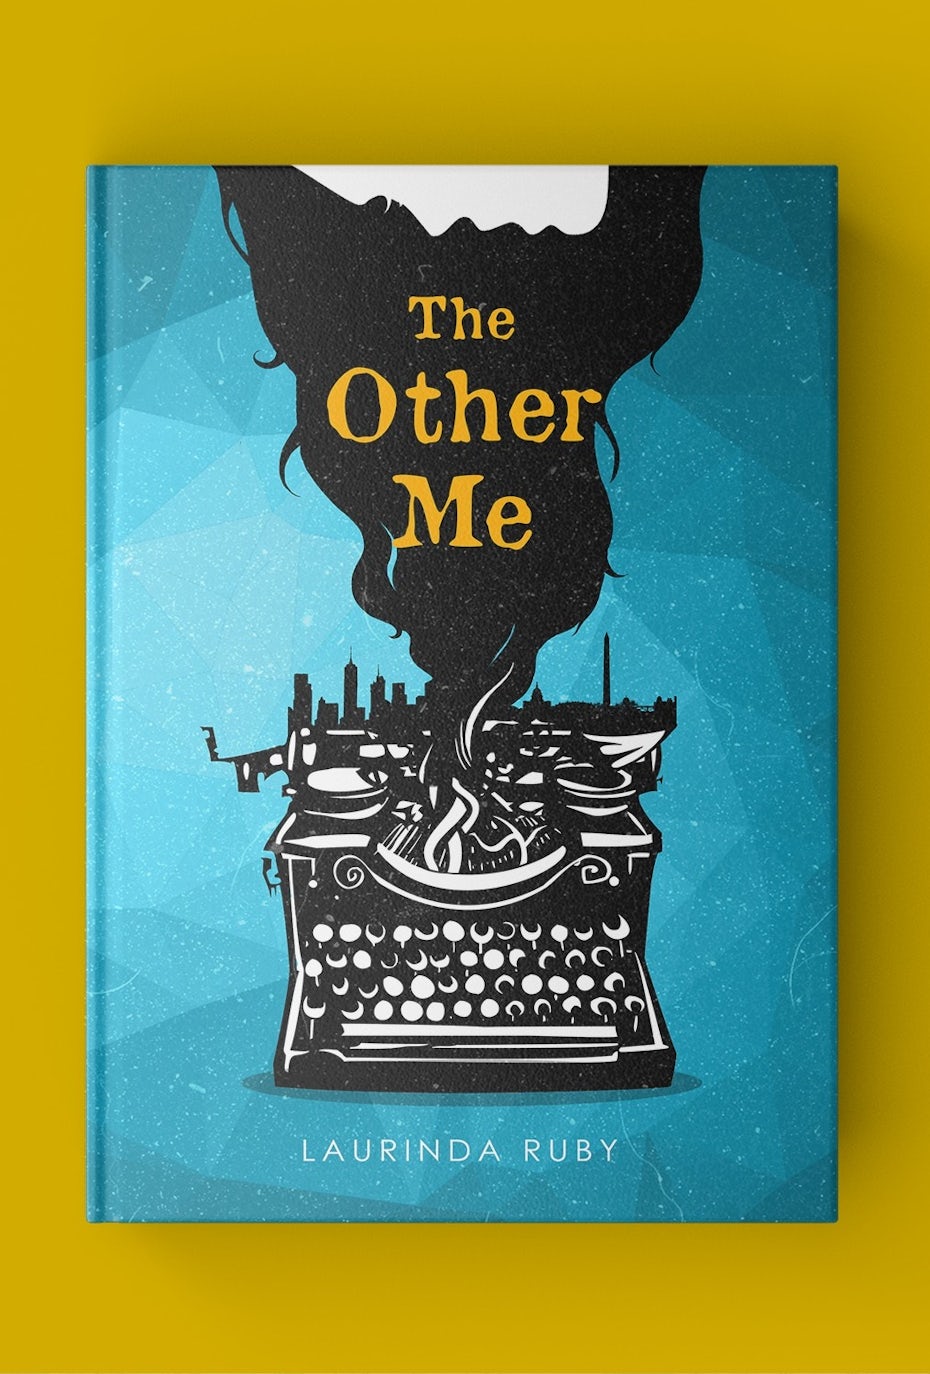 Surreal illustrated book cover design